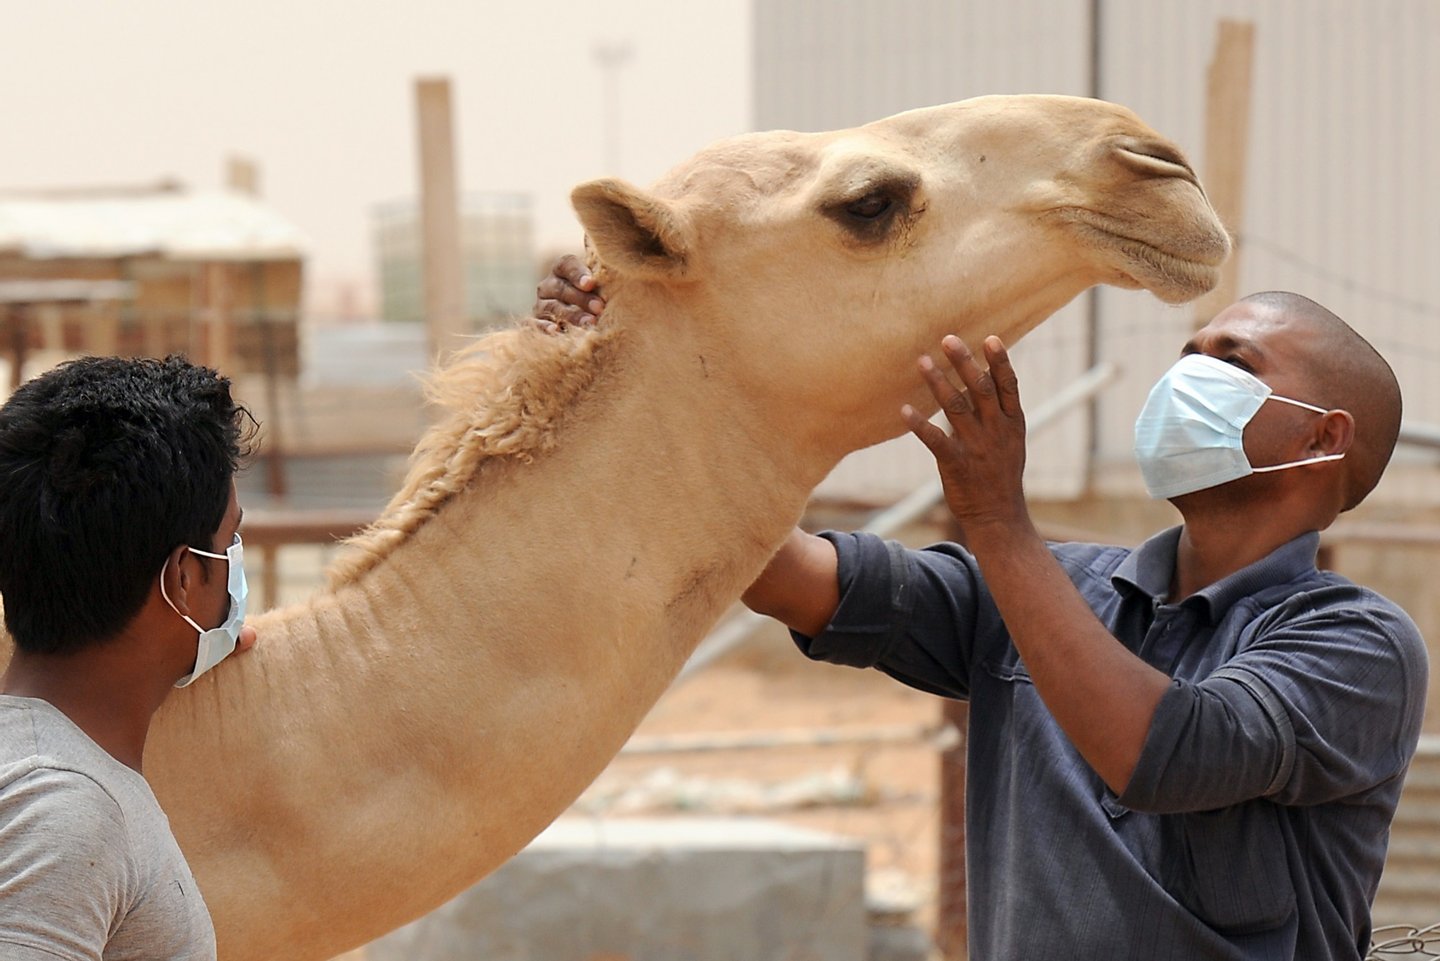 An Indian worker wears a mouth and nose mask as he touches a camel at his Saudi employer's farm on May 12, 2014 outside Riyadh. Saudi Arabia has urged its citizens and foreign workers to wear masks and gloves when dealing with camels to avoid spreading the Middle East Respiratory Syndrome (MERS) coronavirus as health experts said the animal was the likely source of the disease.  AFP PHOTO/FAYEZ NURELDINE        (Photo credit should read FAYEZ NURELDINE/AFP/Getty Images)